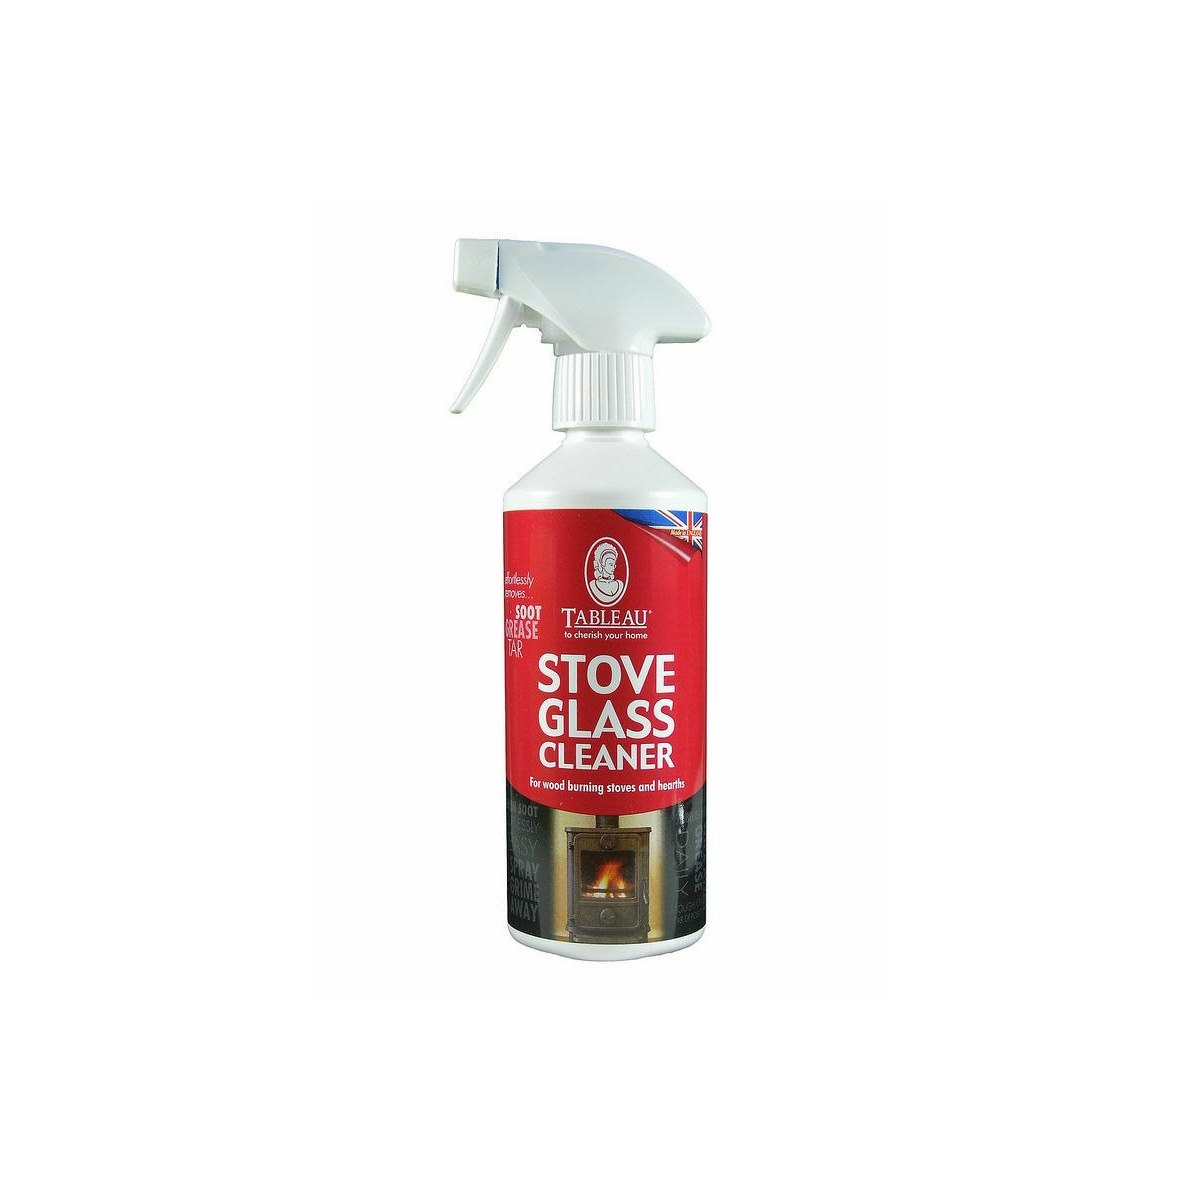 Tableau Stove Glass Cleaner Spray 500ml